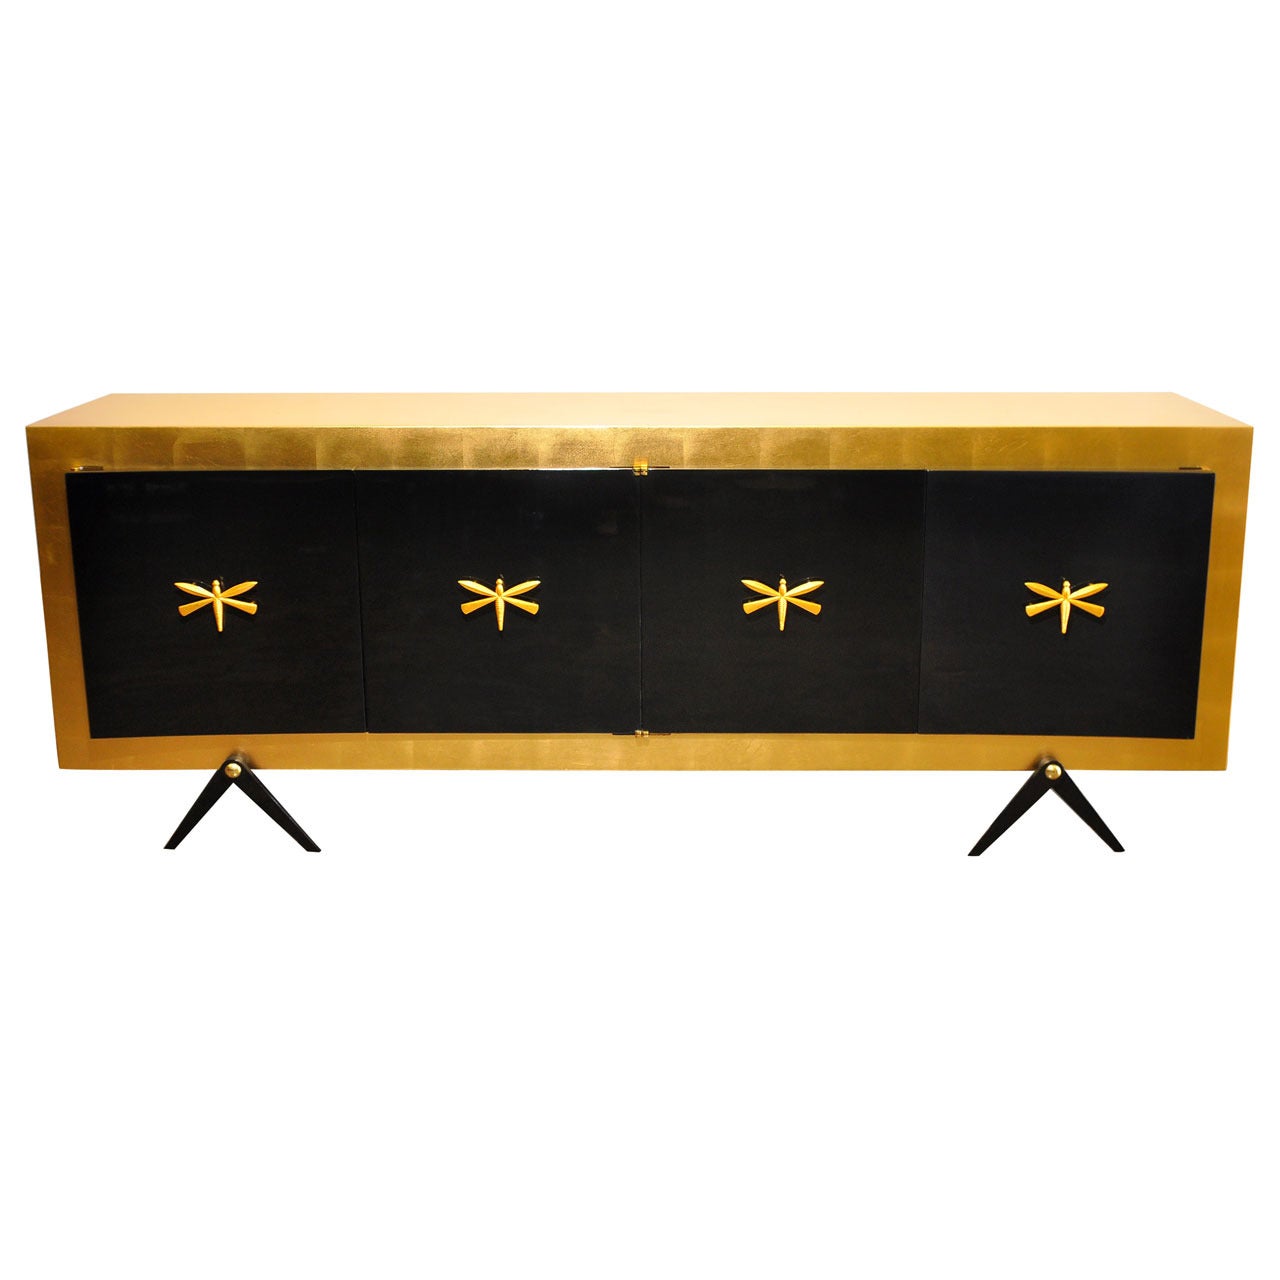 Exquisite Gold Leaf and Black Lacquer Credenza by Arturo Pani. Mexico, 1950. For Sale